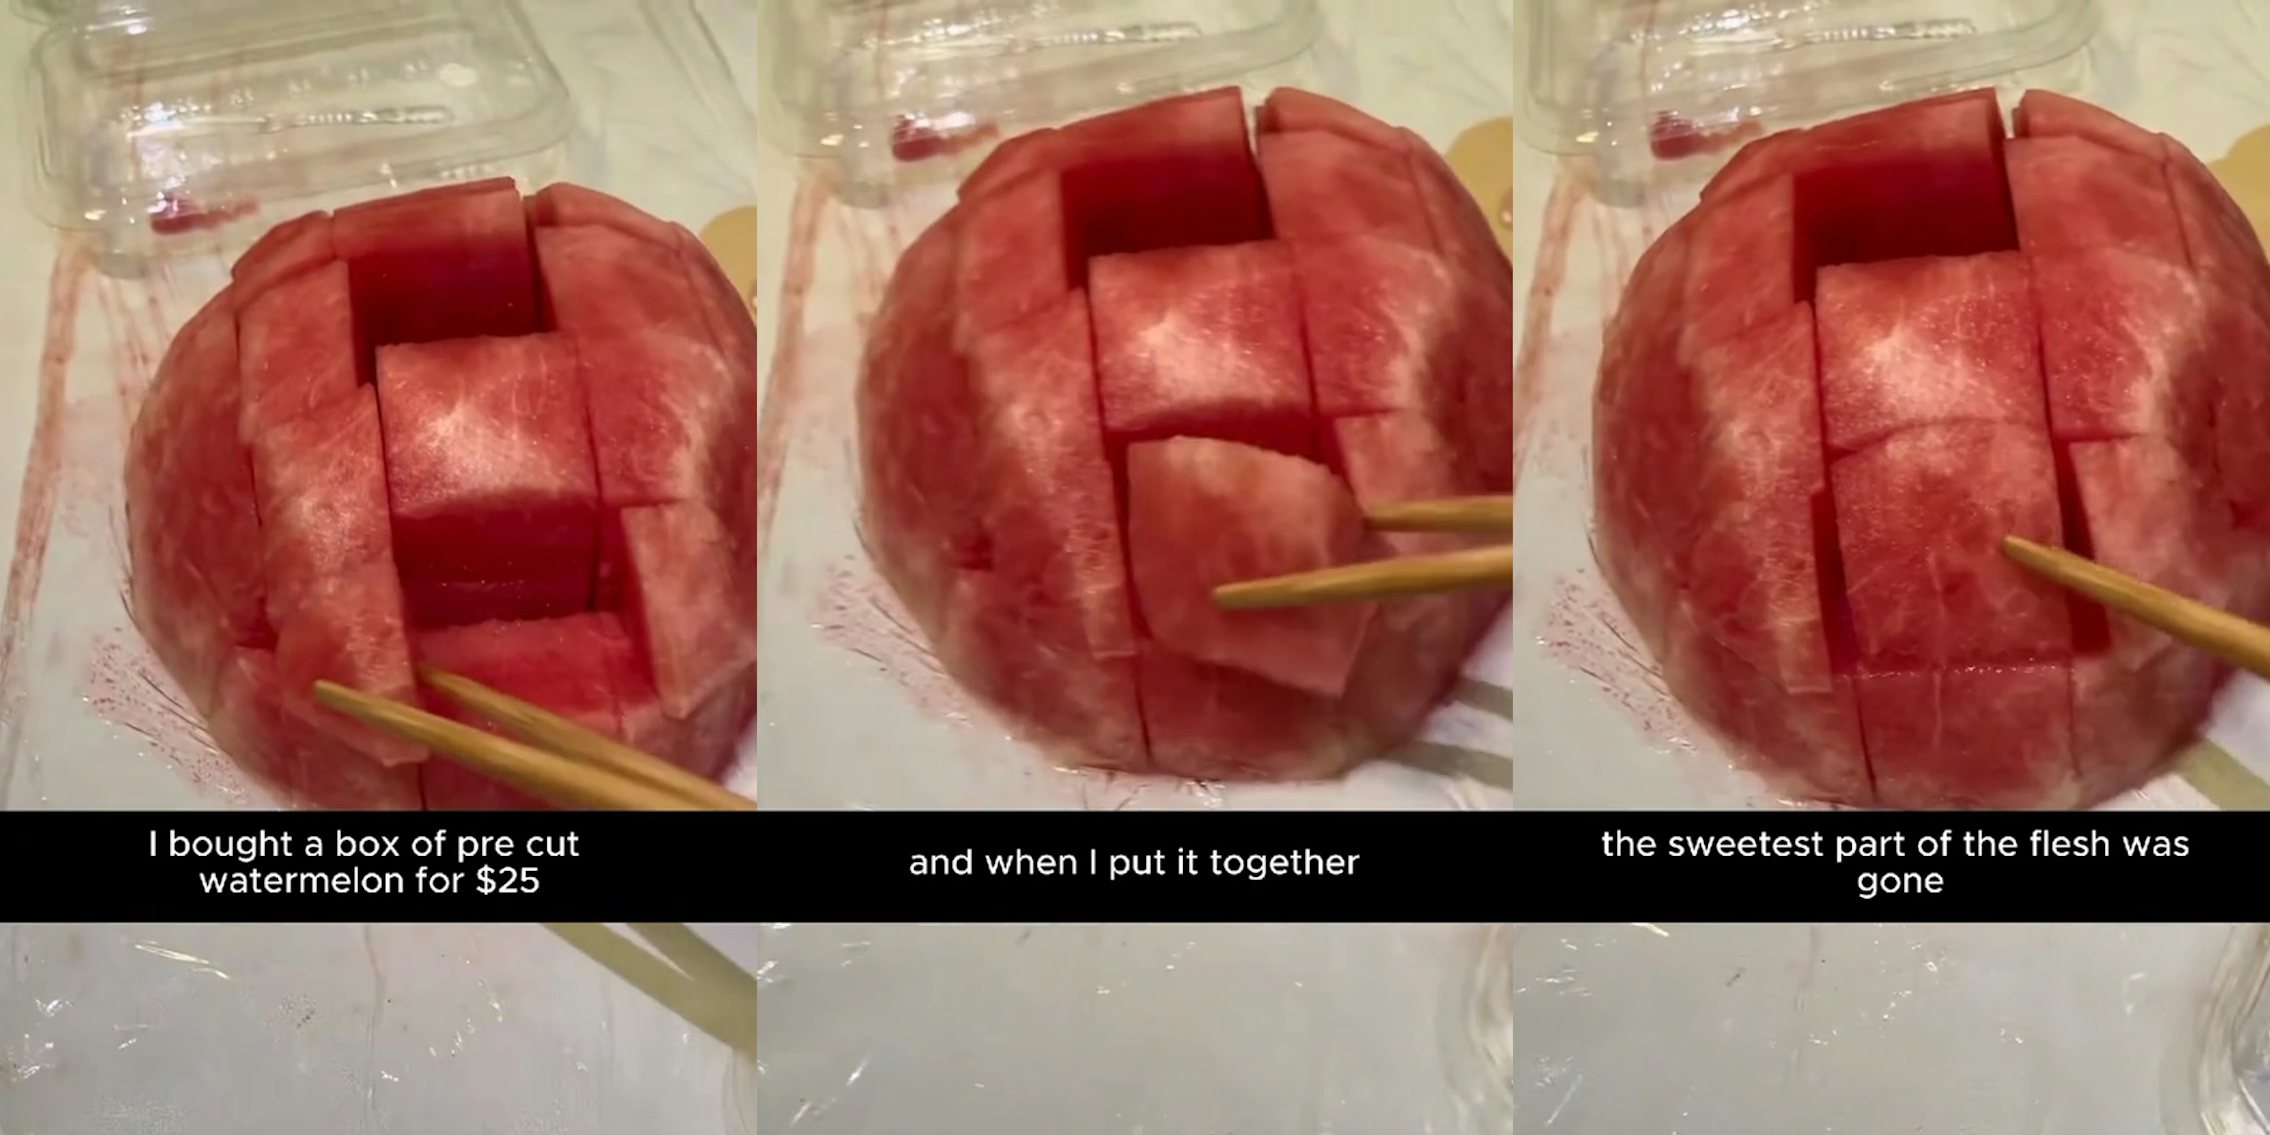 person using chopsticks to place watermelon slices back together with caption 'I bought a box of pre cut watermelon for $25' (l) person using chopsticks to place watermelon slices back together with caption 'and when I put it back together' (c) person using chopsticks to place watermelon slices back together with caption 'the sweetest part of the flesh was gone' (r)